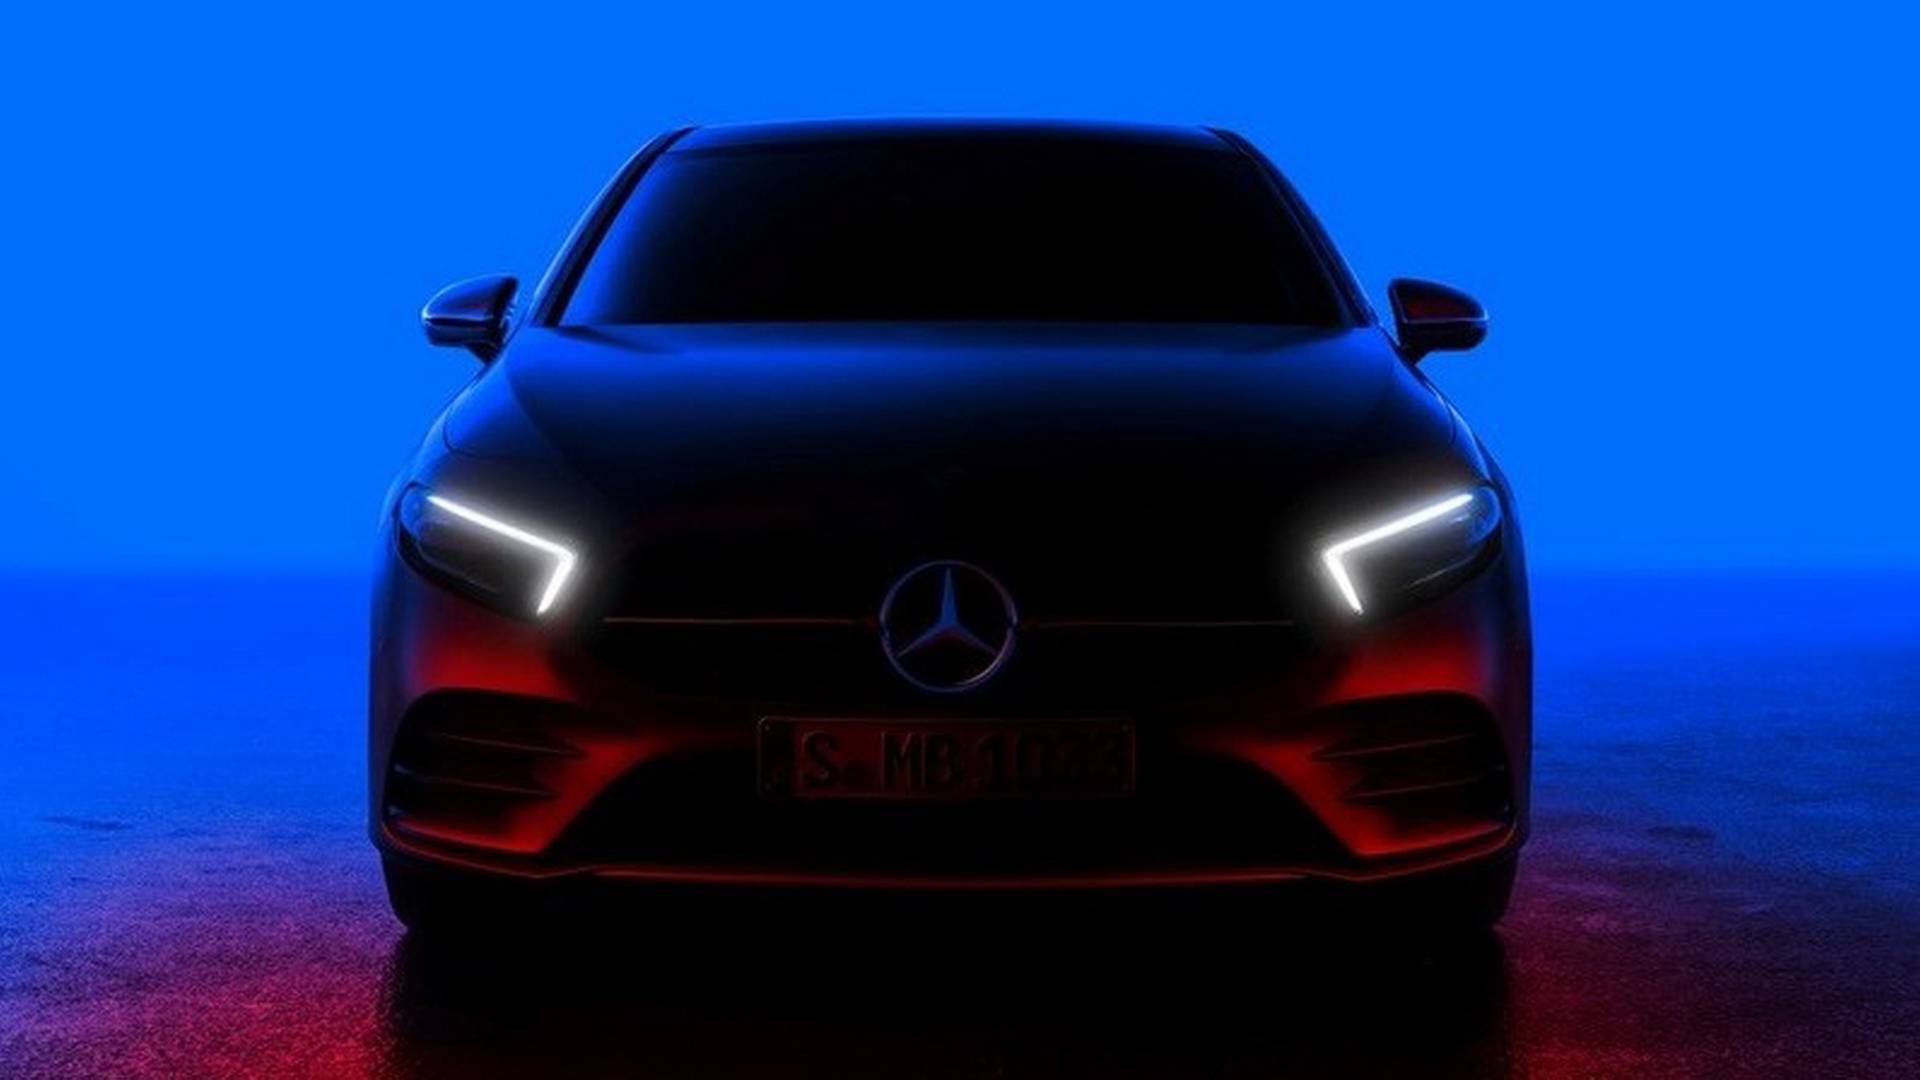 Mercedes-Benz A-Class 2018: The last stand…